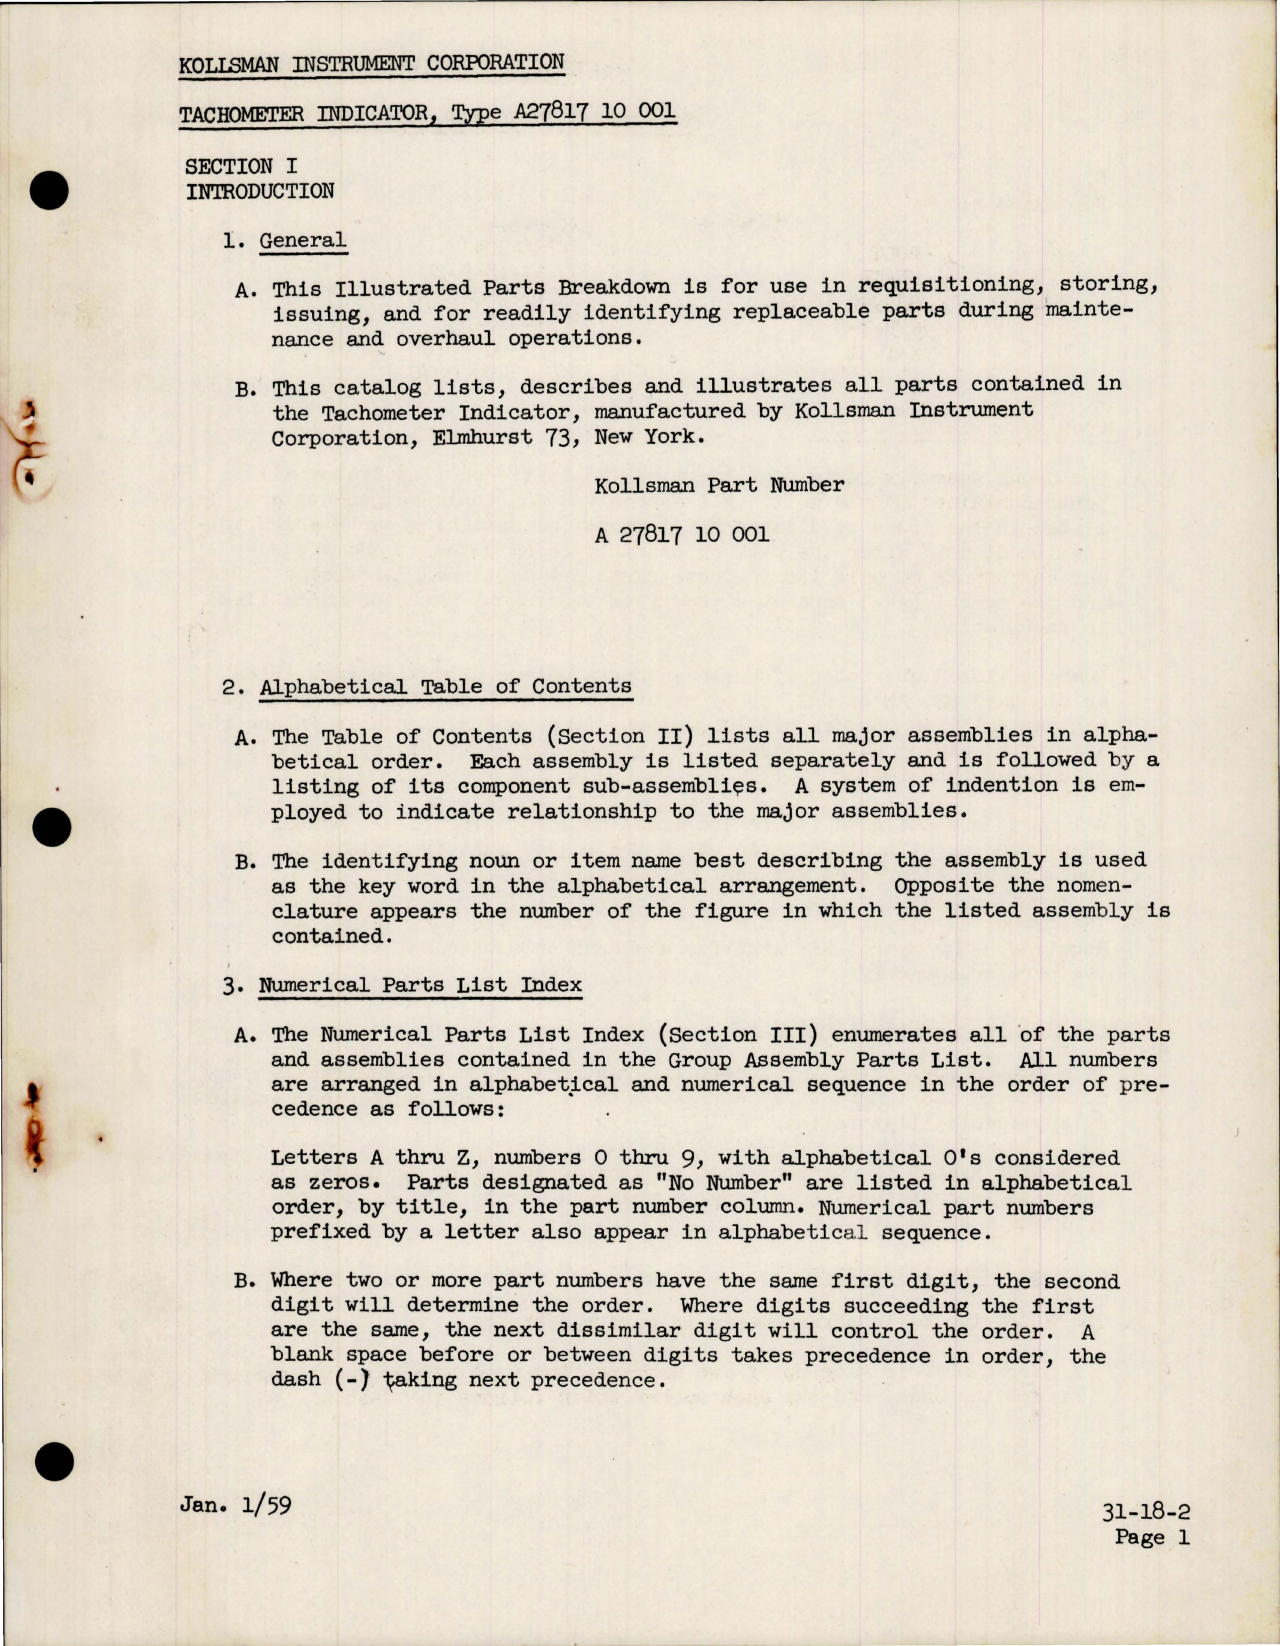 Sample page 5 from AirCorps Library document: Illustrated Parts Breakdown for Tachometer Indicator - Type A27817 10 001